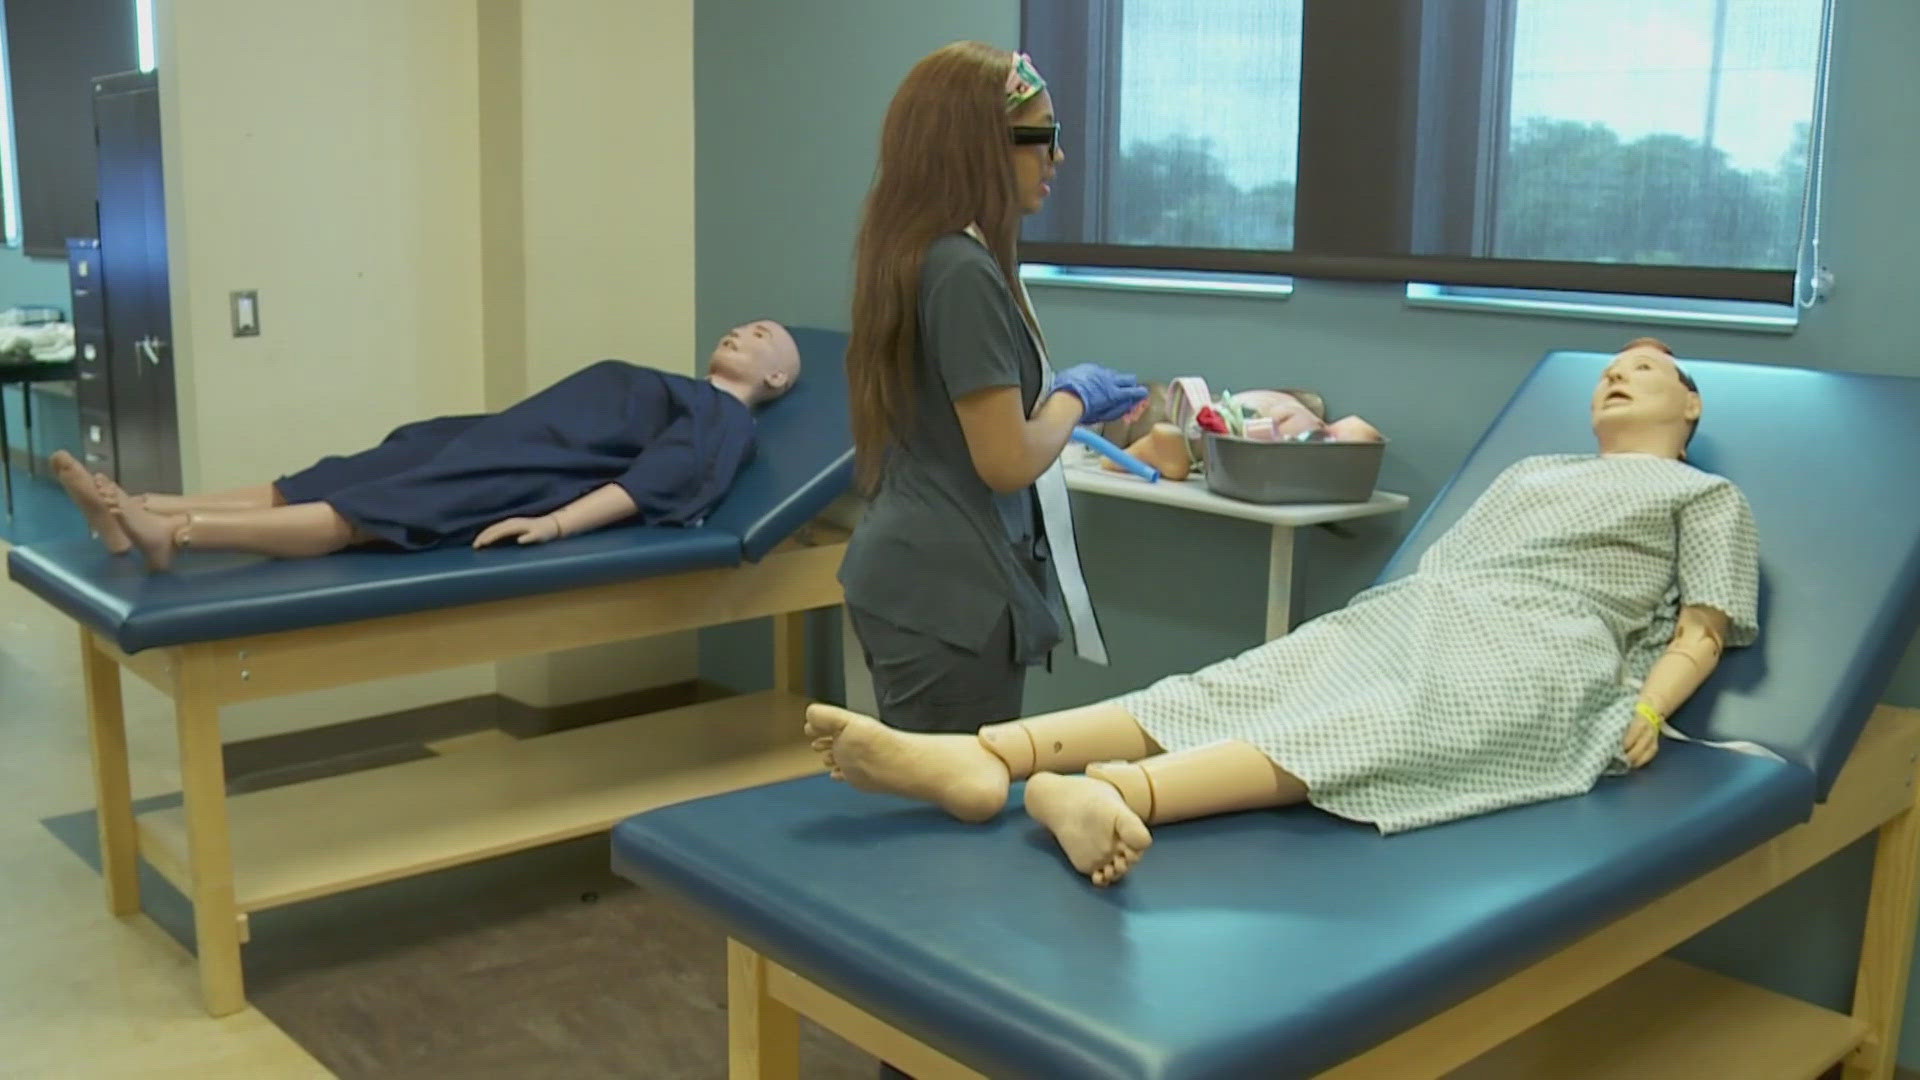 Martin Luther King Jr. High School has hands on training for students in the medical field.